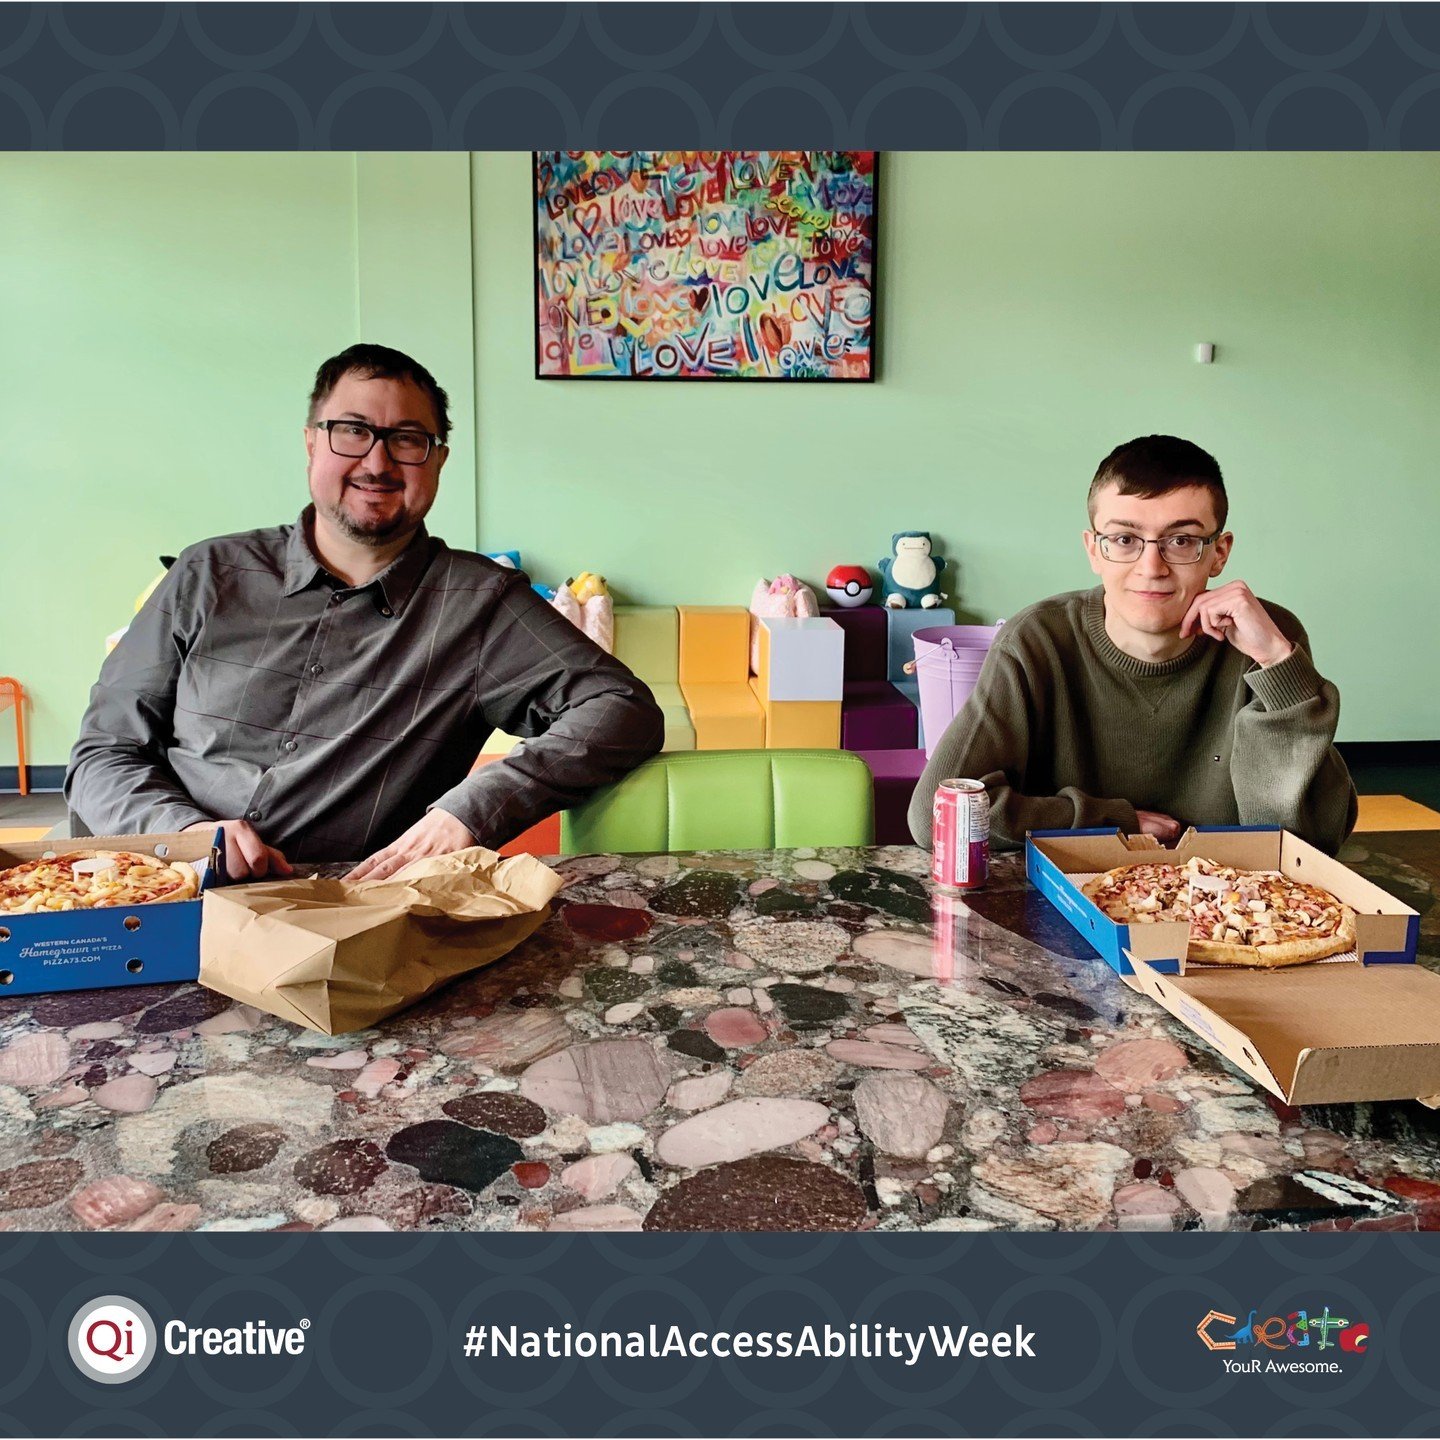 During #NationalAccessAbilityWeek (May 26 to June 1), we're giving a big shoutout to Coach Mike! As the head of our Qi Internship program at Qi Creative, he works tirelessly to promote accessibility, inclusion, and equal opportunities for everyone. ?